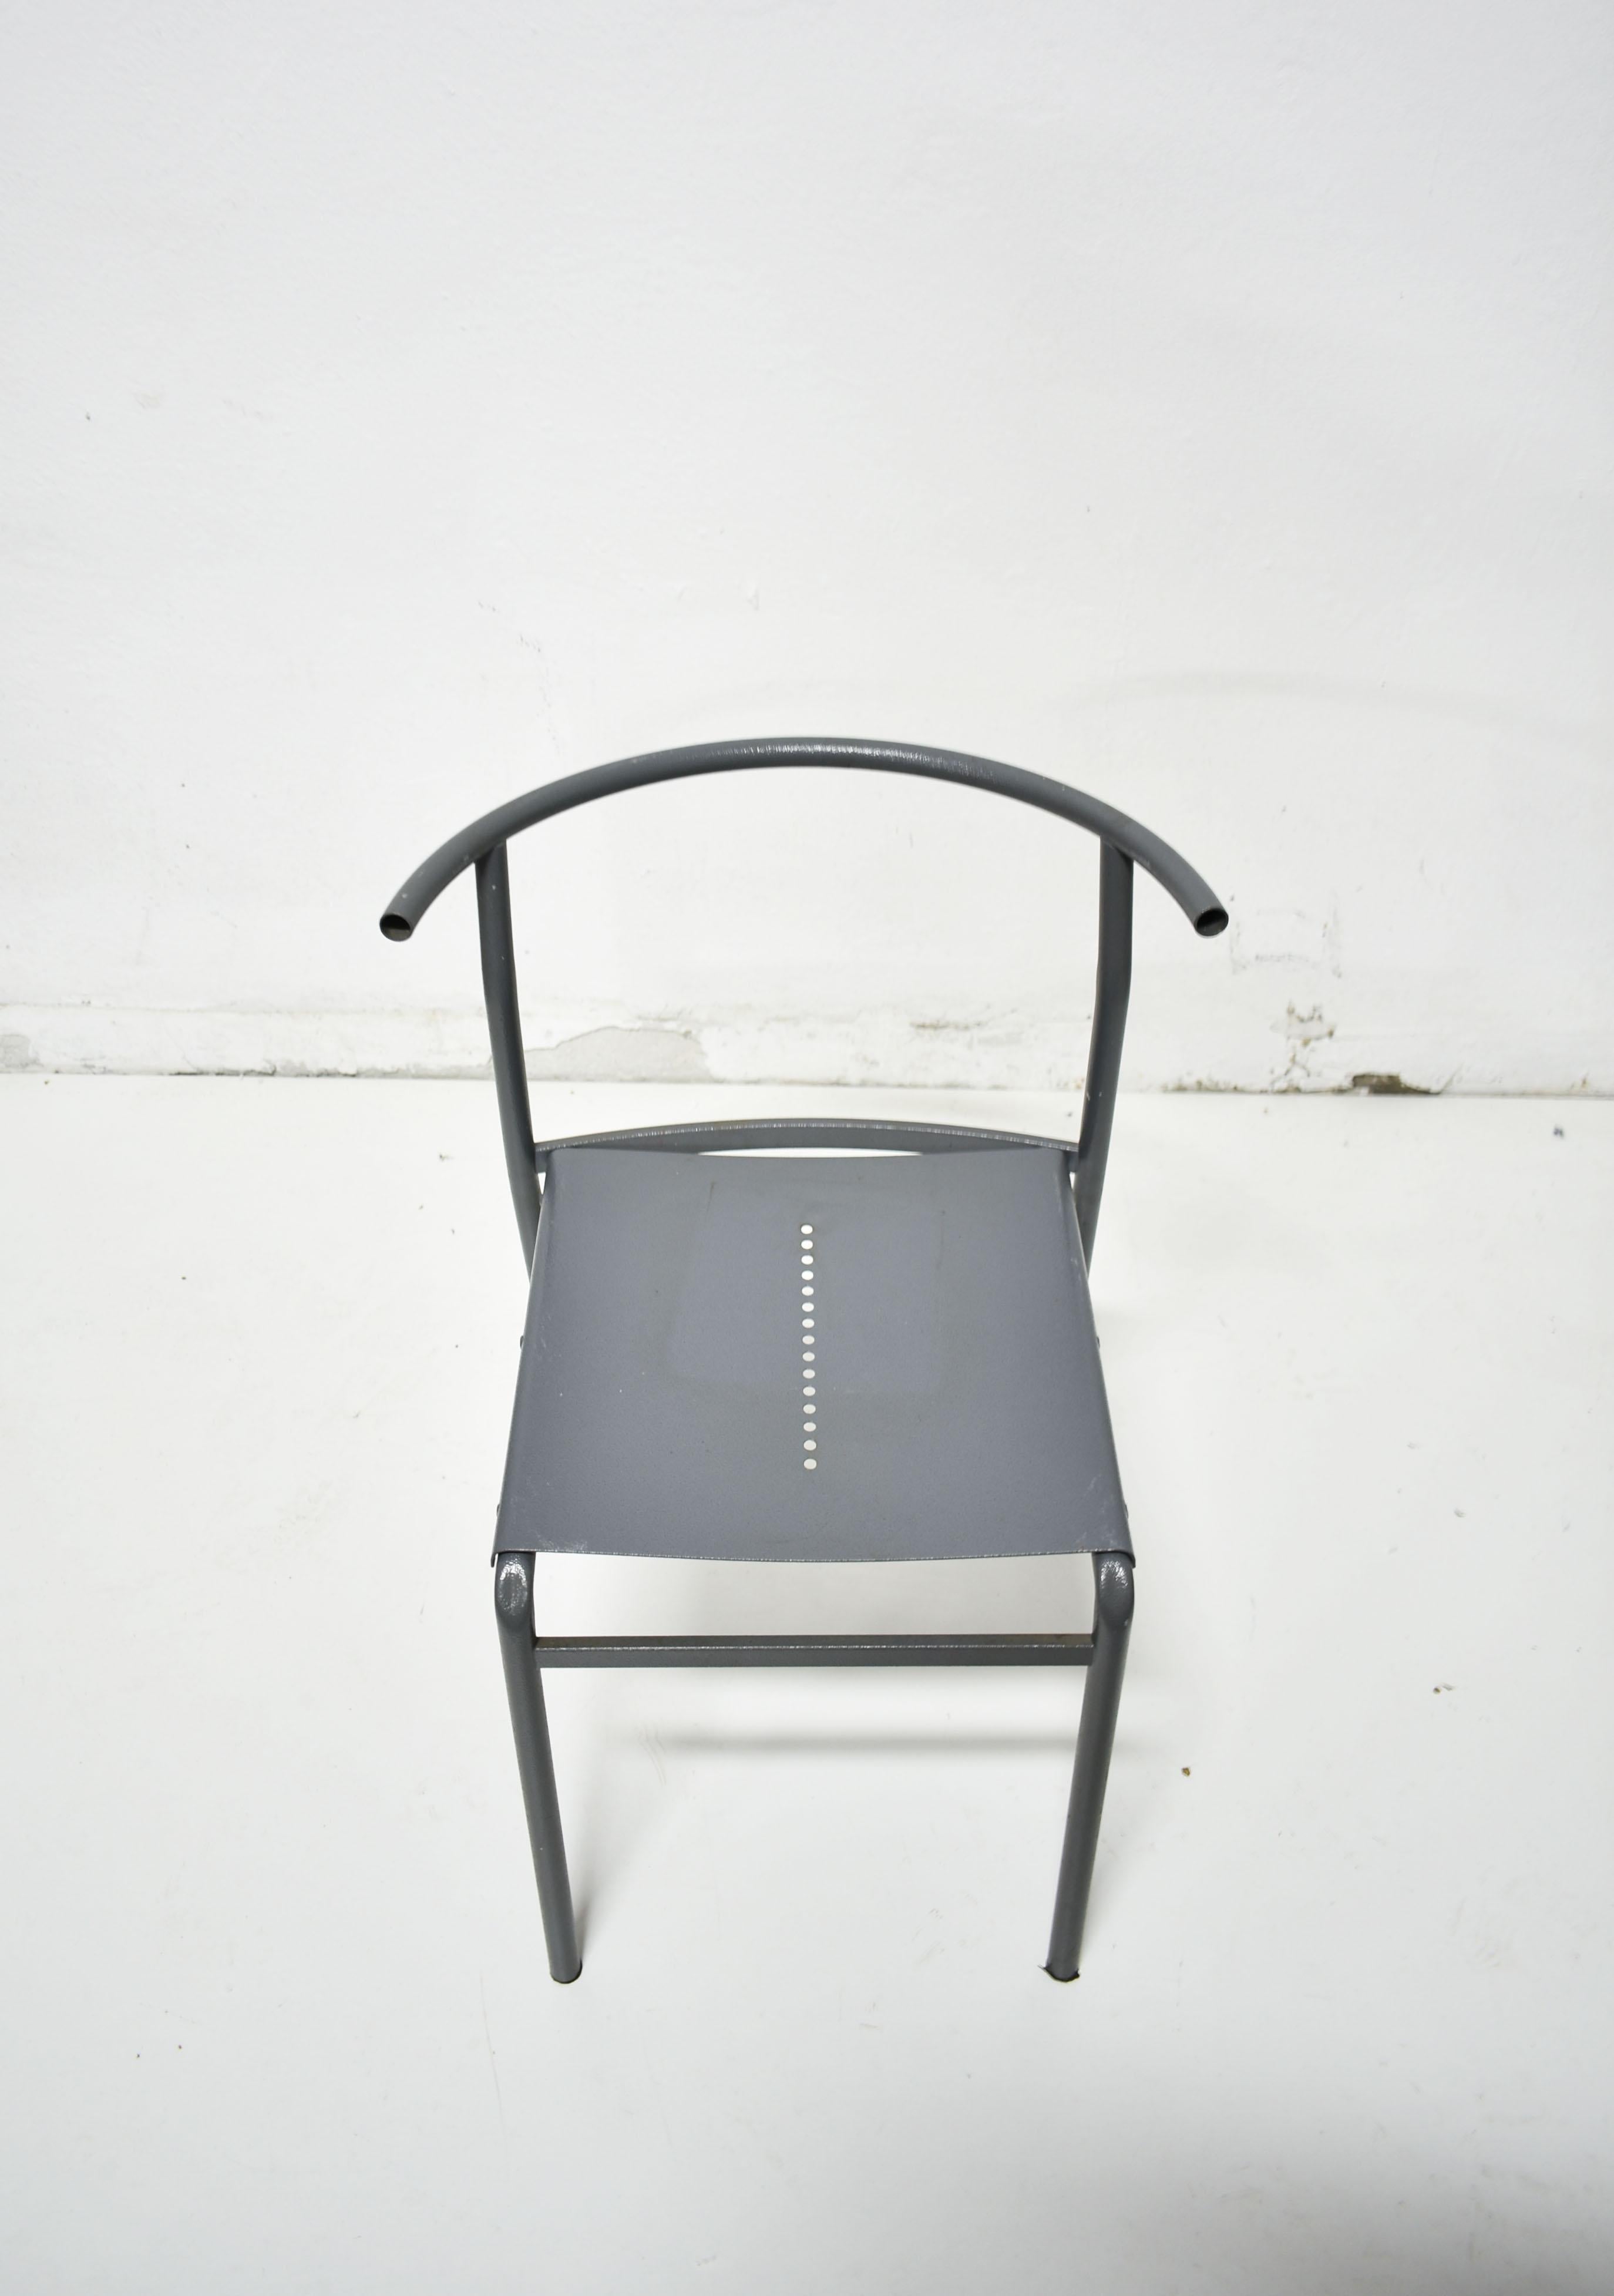 Minimalist post-modern sculptural cafè chair manufactured in Italy in the 1980s.

Design attributed to French designer Philippe Starck (Chair designed for Cafè Costes Paris and manufactured by Italian company Baleri in the 1980s and the